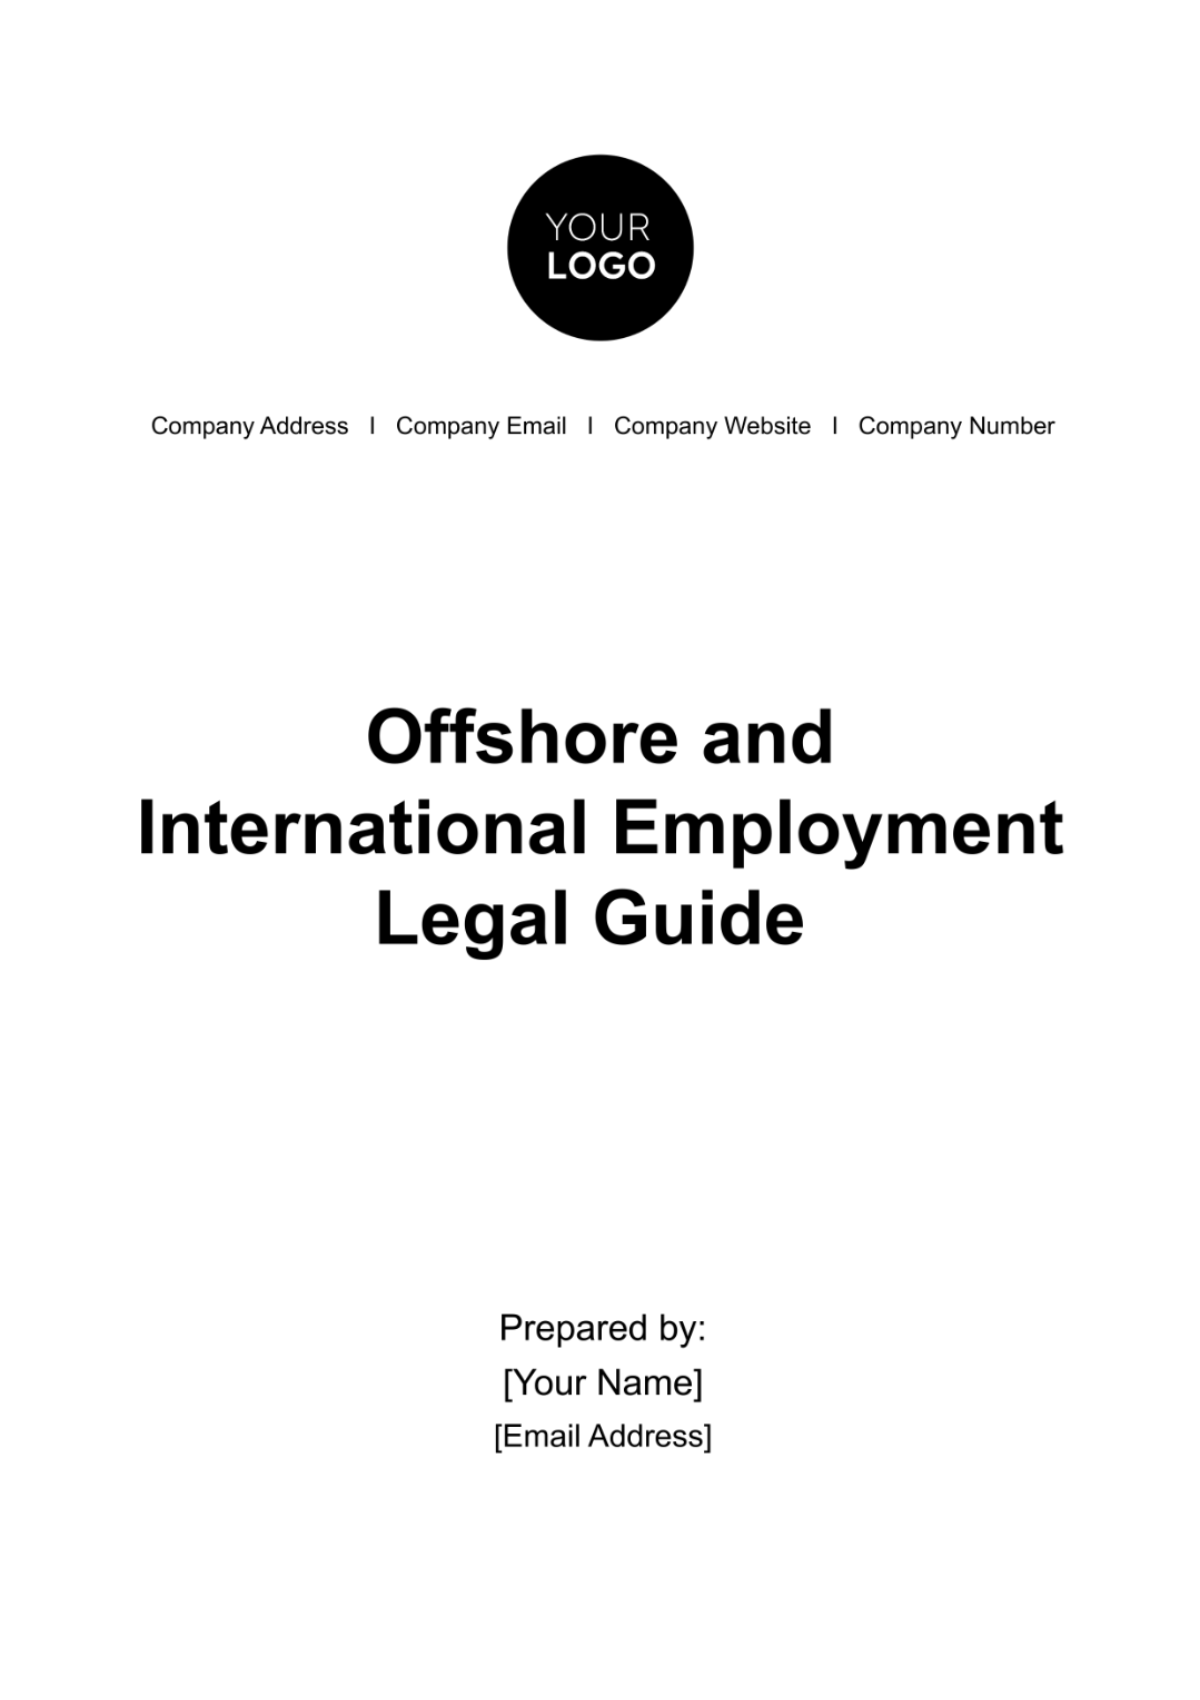 Offshore and International Employment Legal Guide HR Template